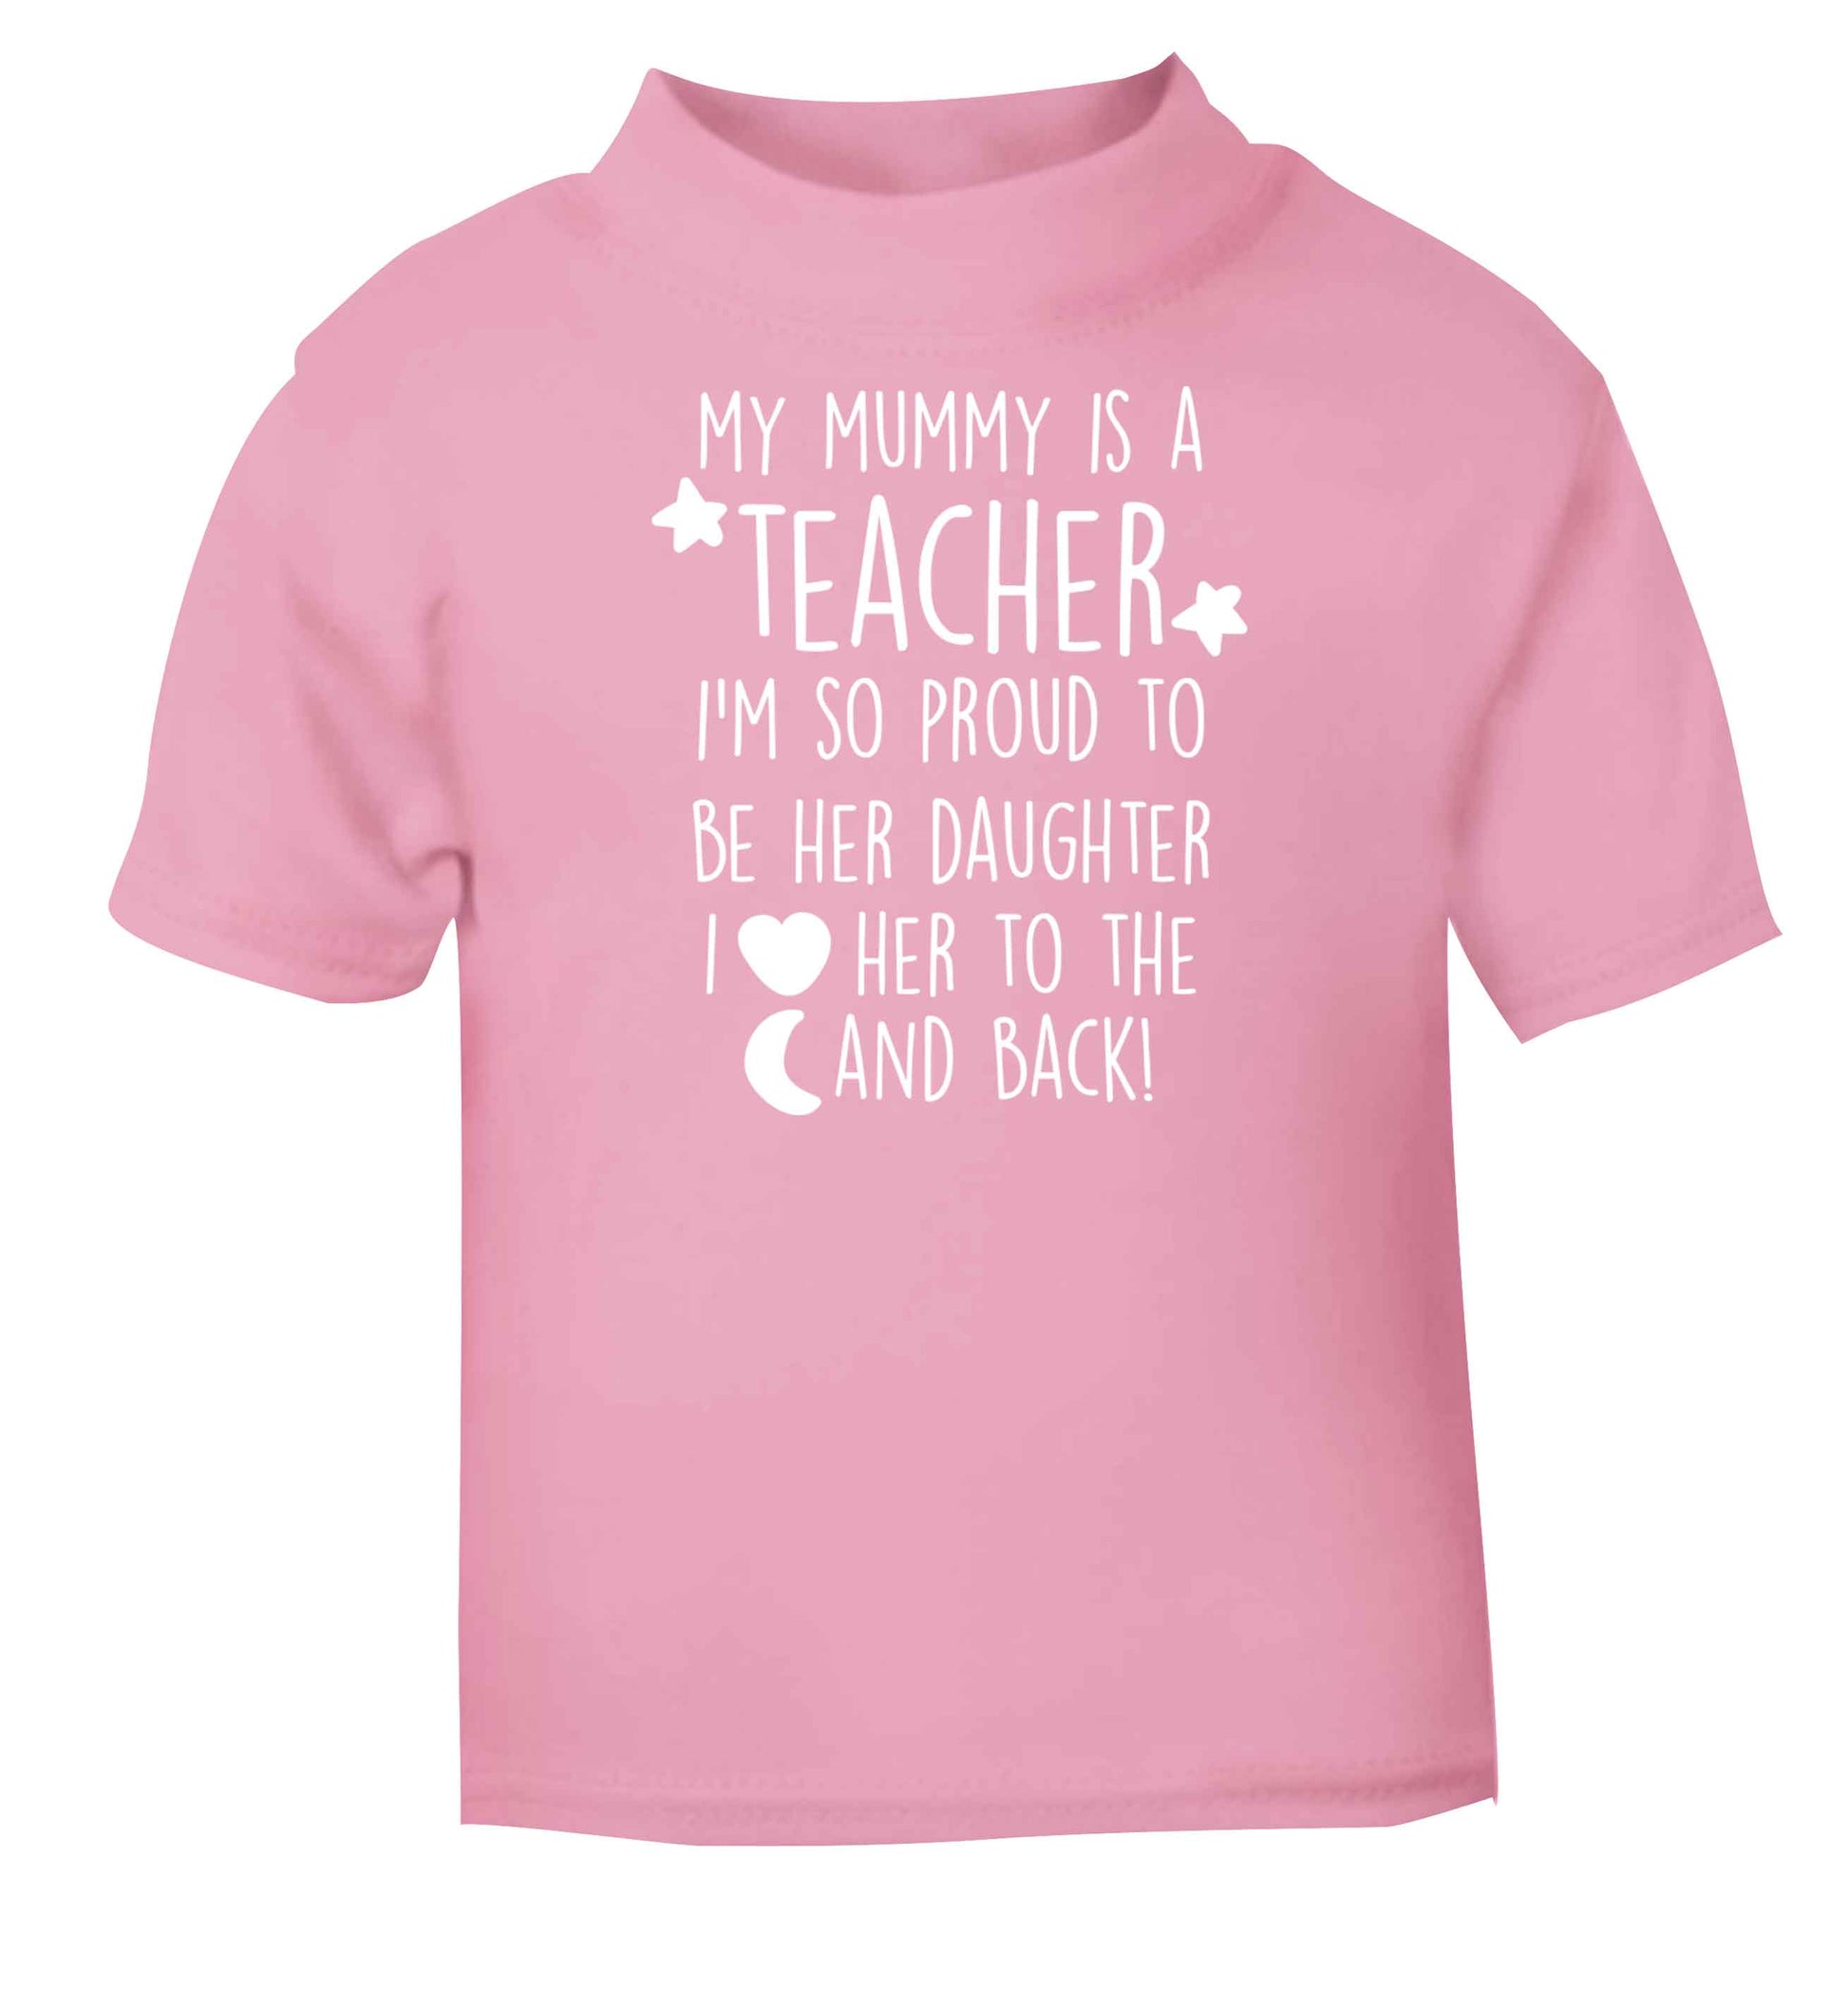 My mummy is a teacher I'm so proud to be her daughter I love her to the moon and back light pink baby toddler Tshirt 2 Years